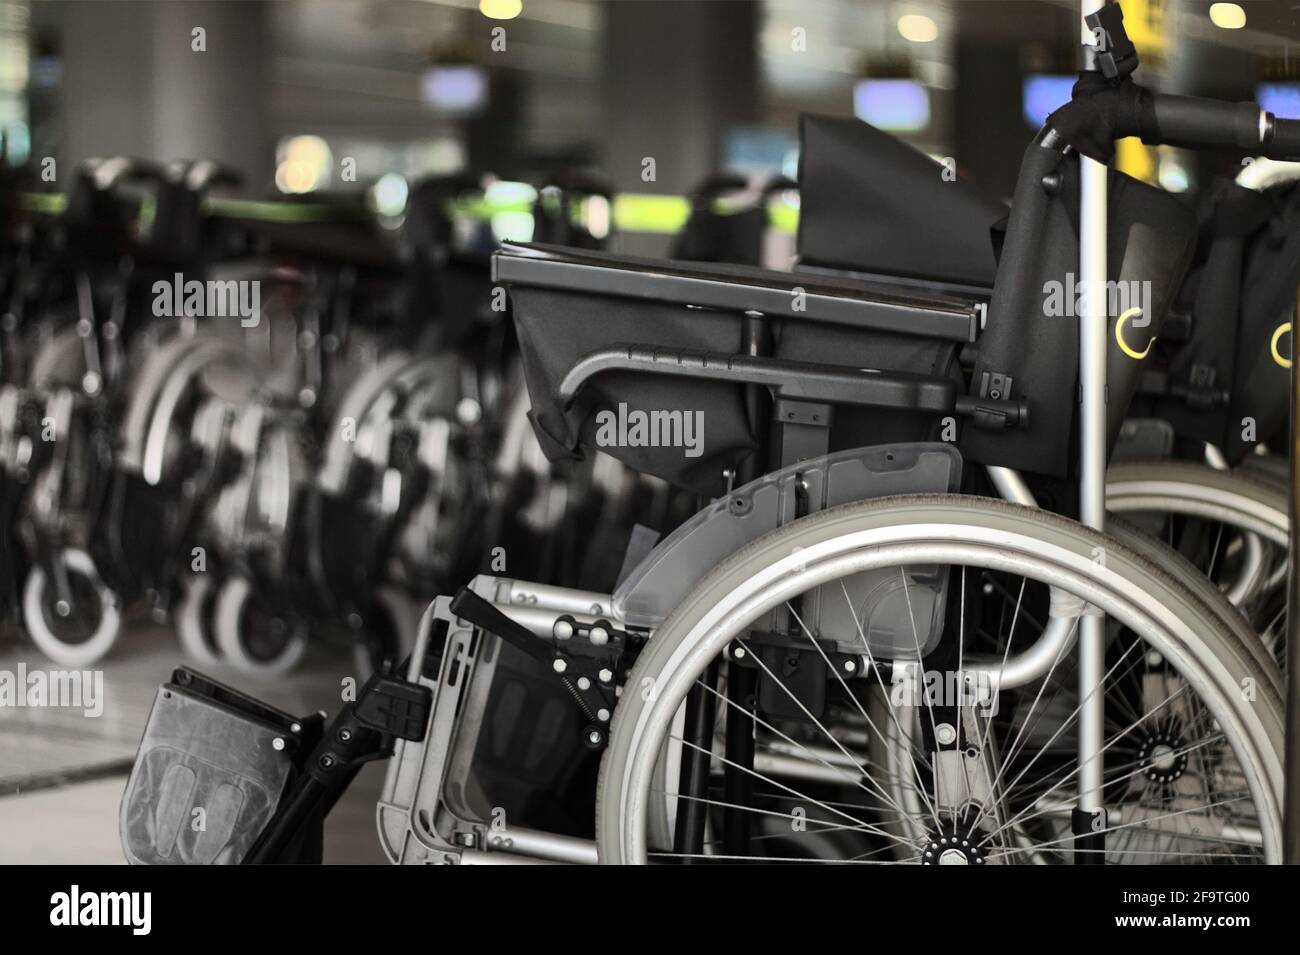 Wheelchair service assistance wheelchairs for mobility wheel chair users at airport terminal Stock Photo